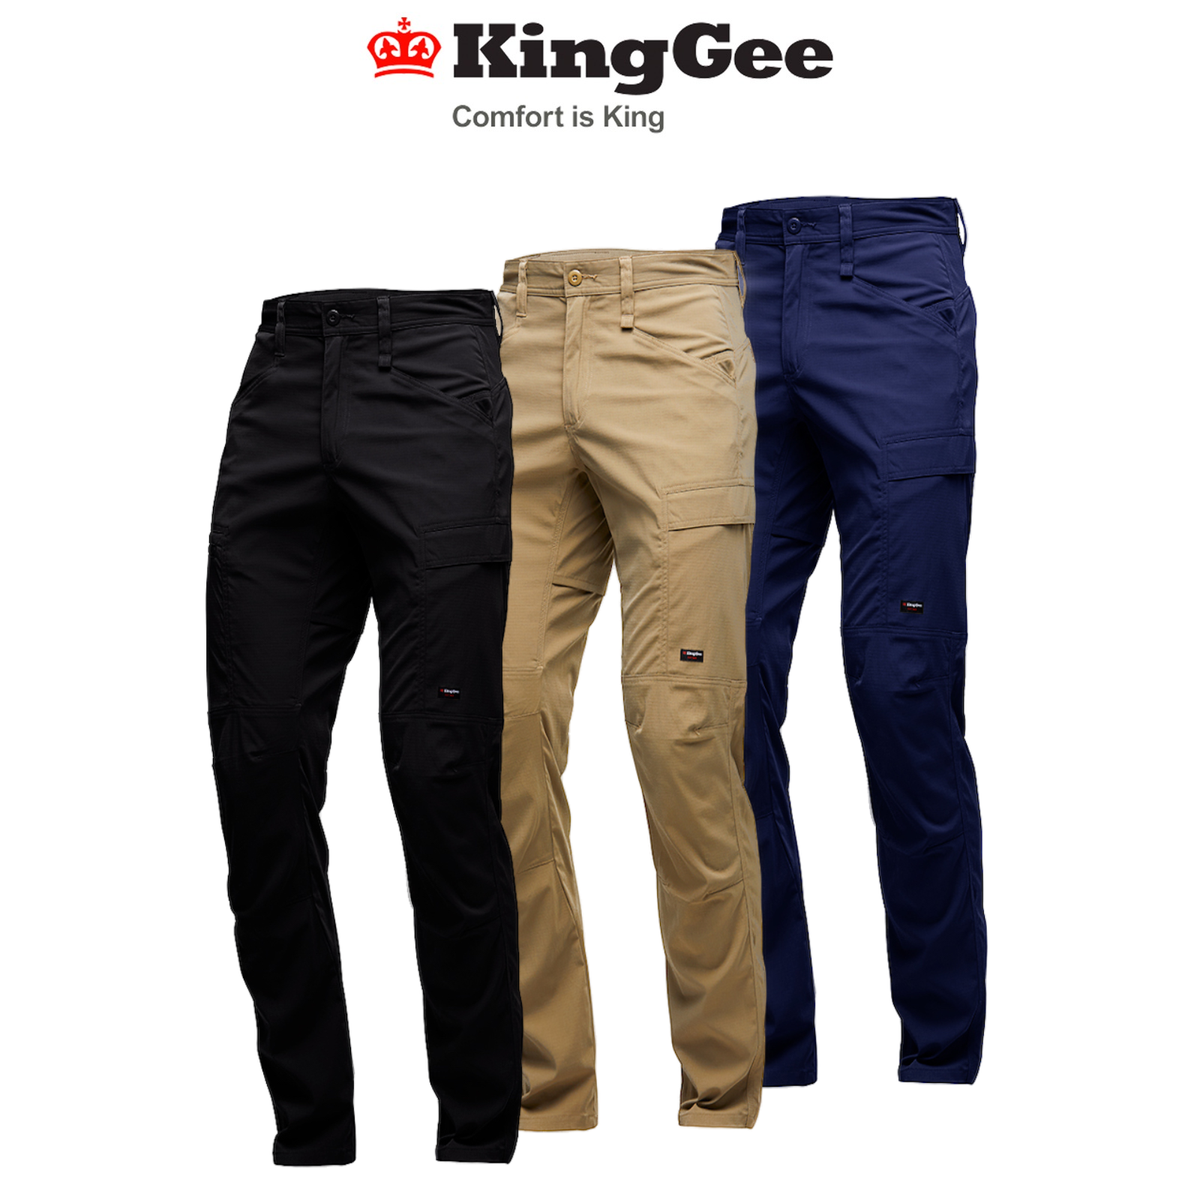 KingGee Mens KingGee Drycool Pant Stretch Ripstop Work Safety Breathable K13007